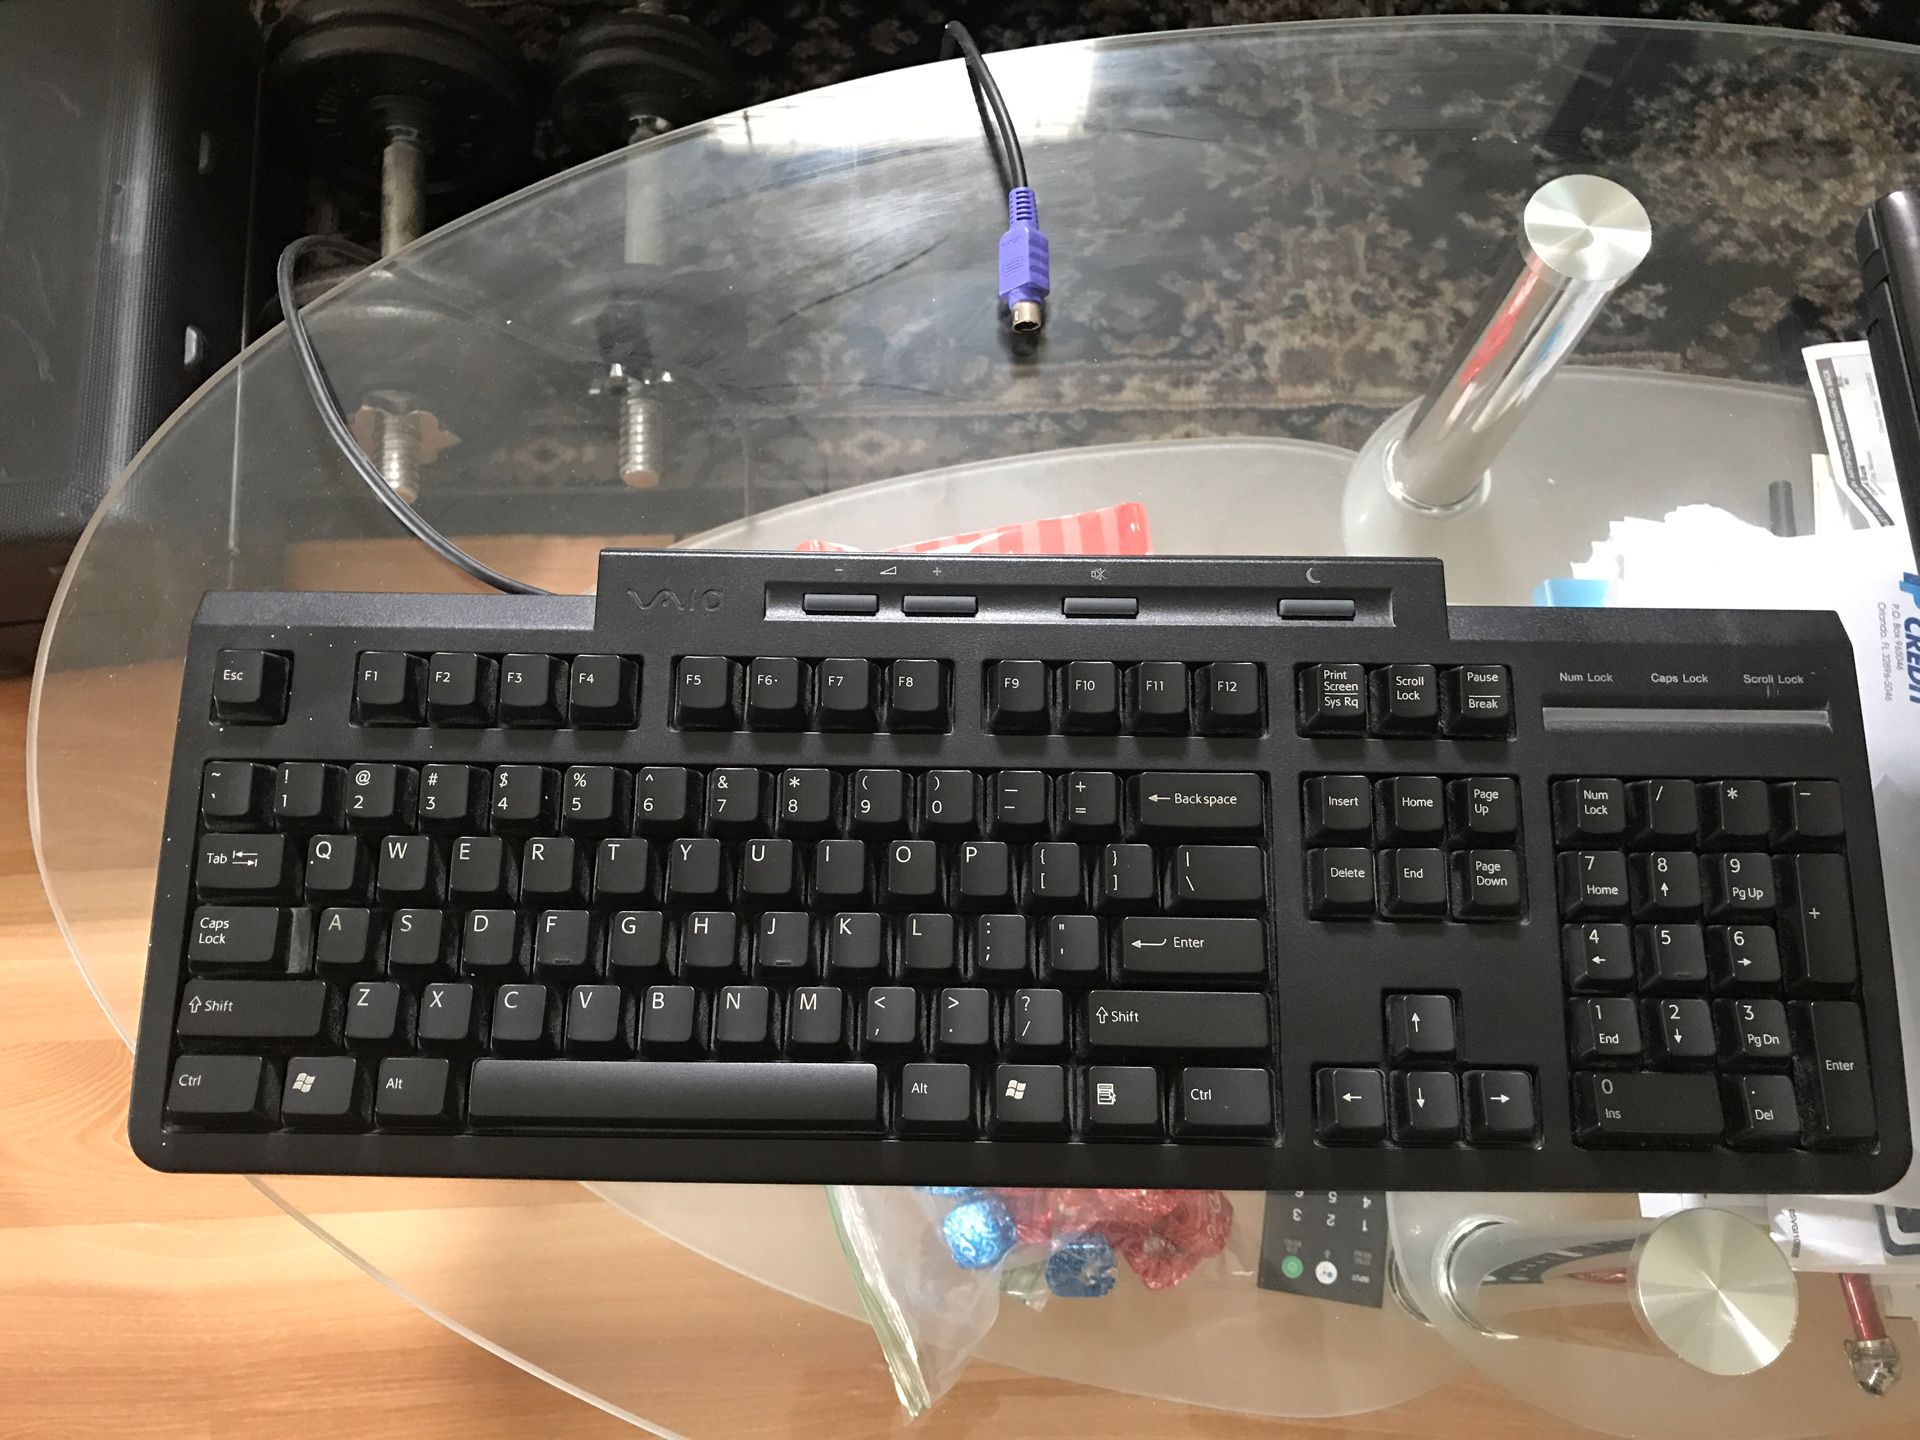 Sony wired keyboard s video works perfect